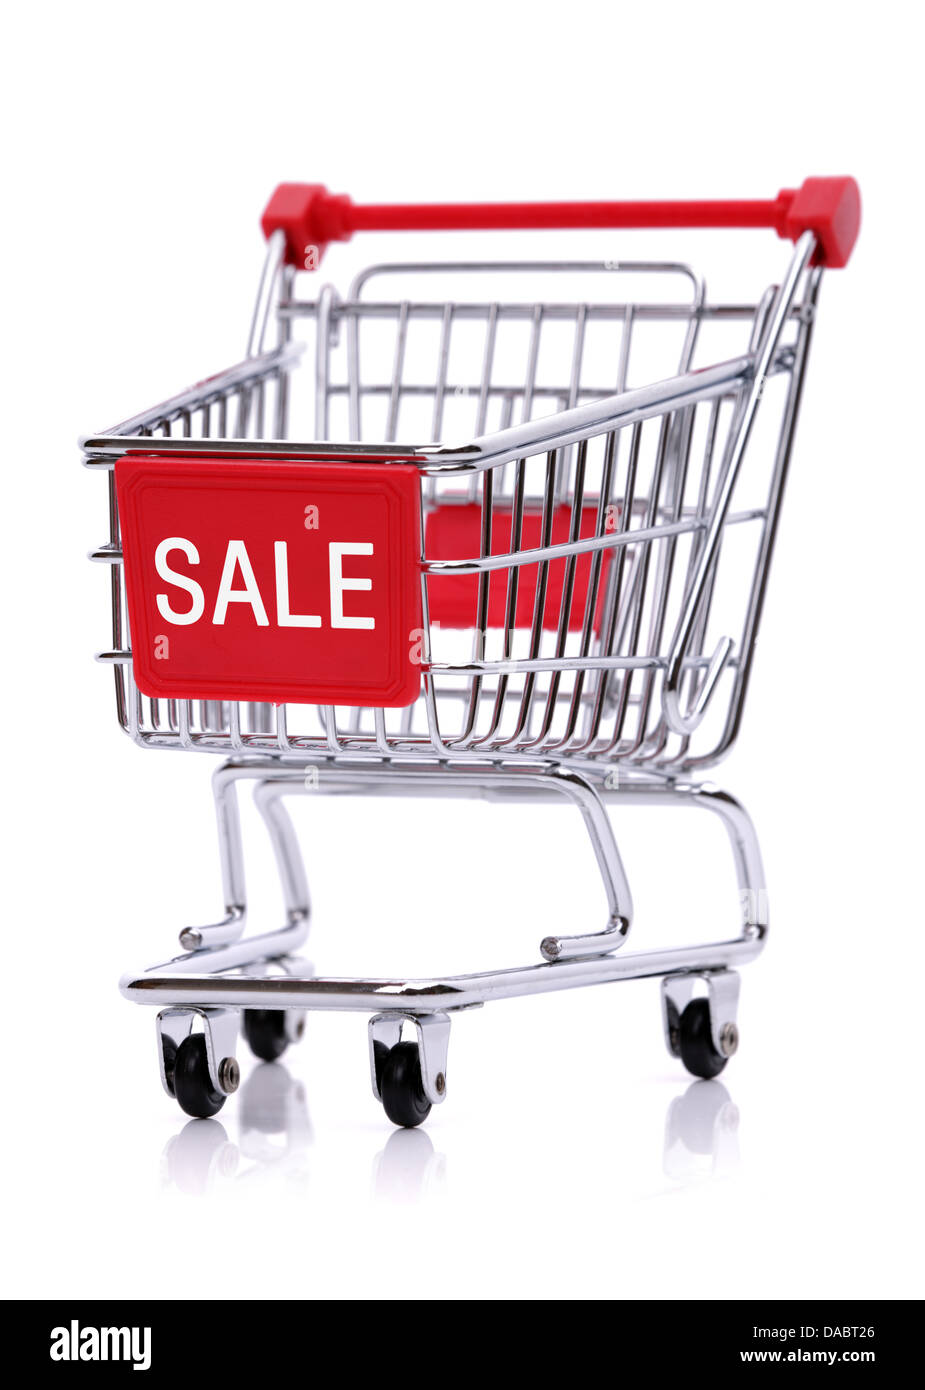 Sale sign on shopping cart Stock Photo